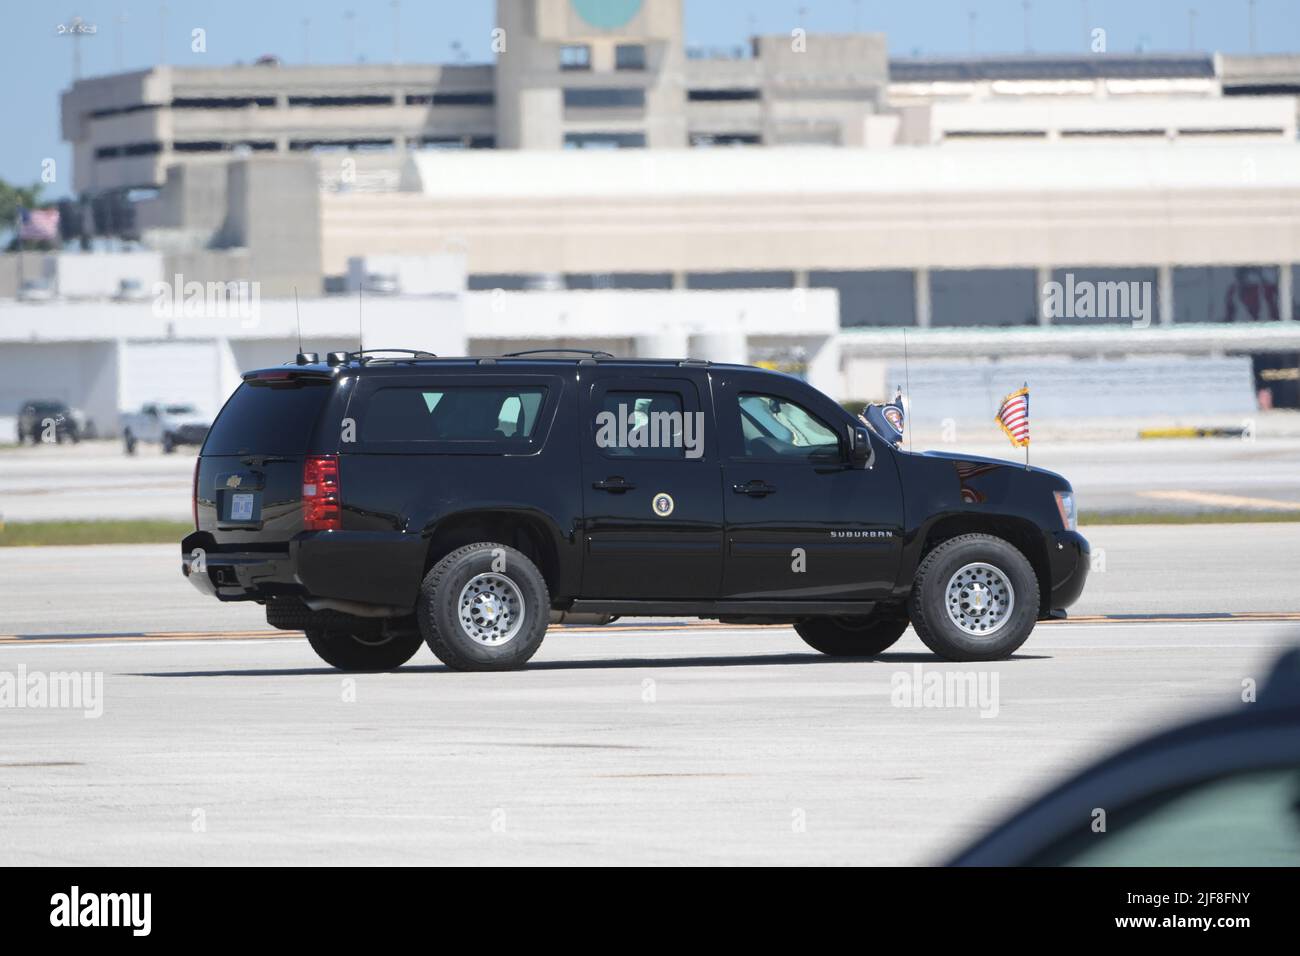 MIAMI, FL - JULY 10: US President Donald Trump arriving at Miami International Airport on July 10, 2020 in Miami, Florida. The President was greeted by Carlos A. Gimnez Mayor of Miami-Dade County and is in town to receive a briefing on SOUTHCOM Enhanced Counternarcotics Operation and to attend Iglesia Doral Jesus Worship Center to participate in a roundtable on Supporting the People of Venezuela People: President Donald Trump Credit: Storms Media Group/Alamy Live News Stock Photo